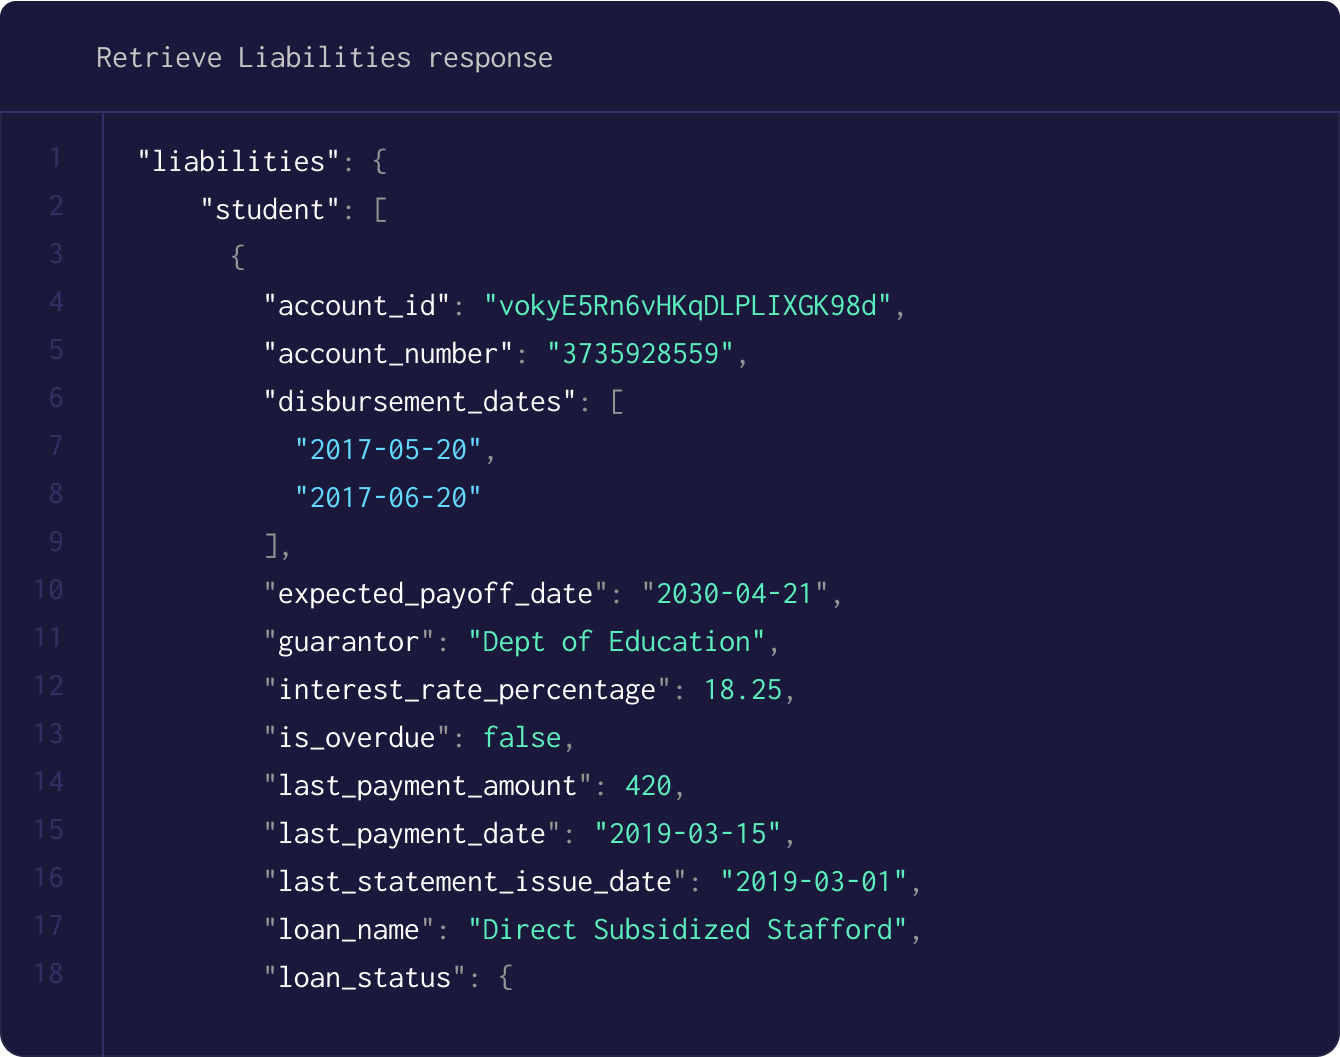 A code editor displaying a JSON structure titled 'Retrieve Liabilities response'. It includes details of a student loan, such as account ID, account number, disbursement dates, expected payoff date, guarantor as 'Dept. of Education', interest rate, payment status, and loan name 'Direct Subsidized Stafford'. The data suggests a structured and detailed financial record.